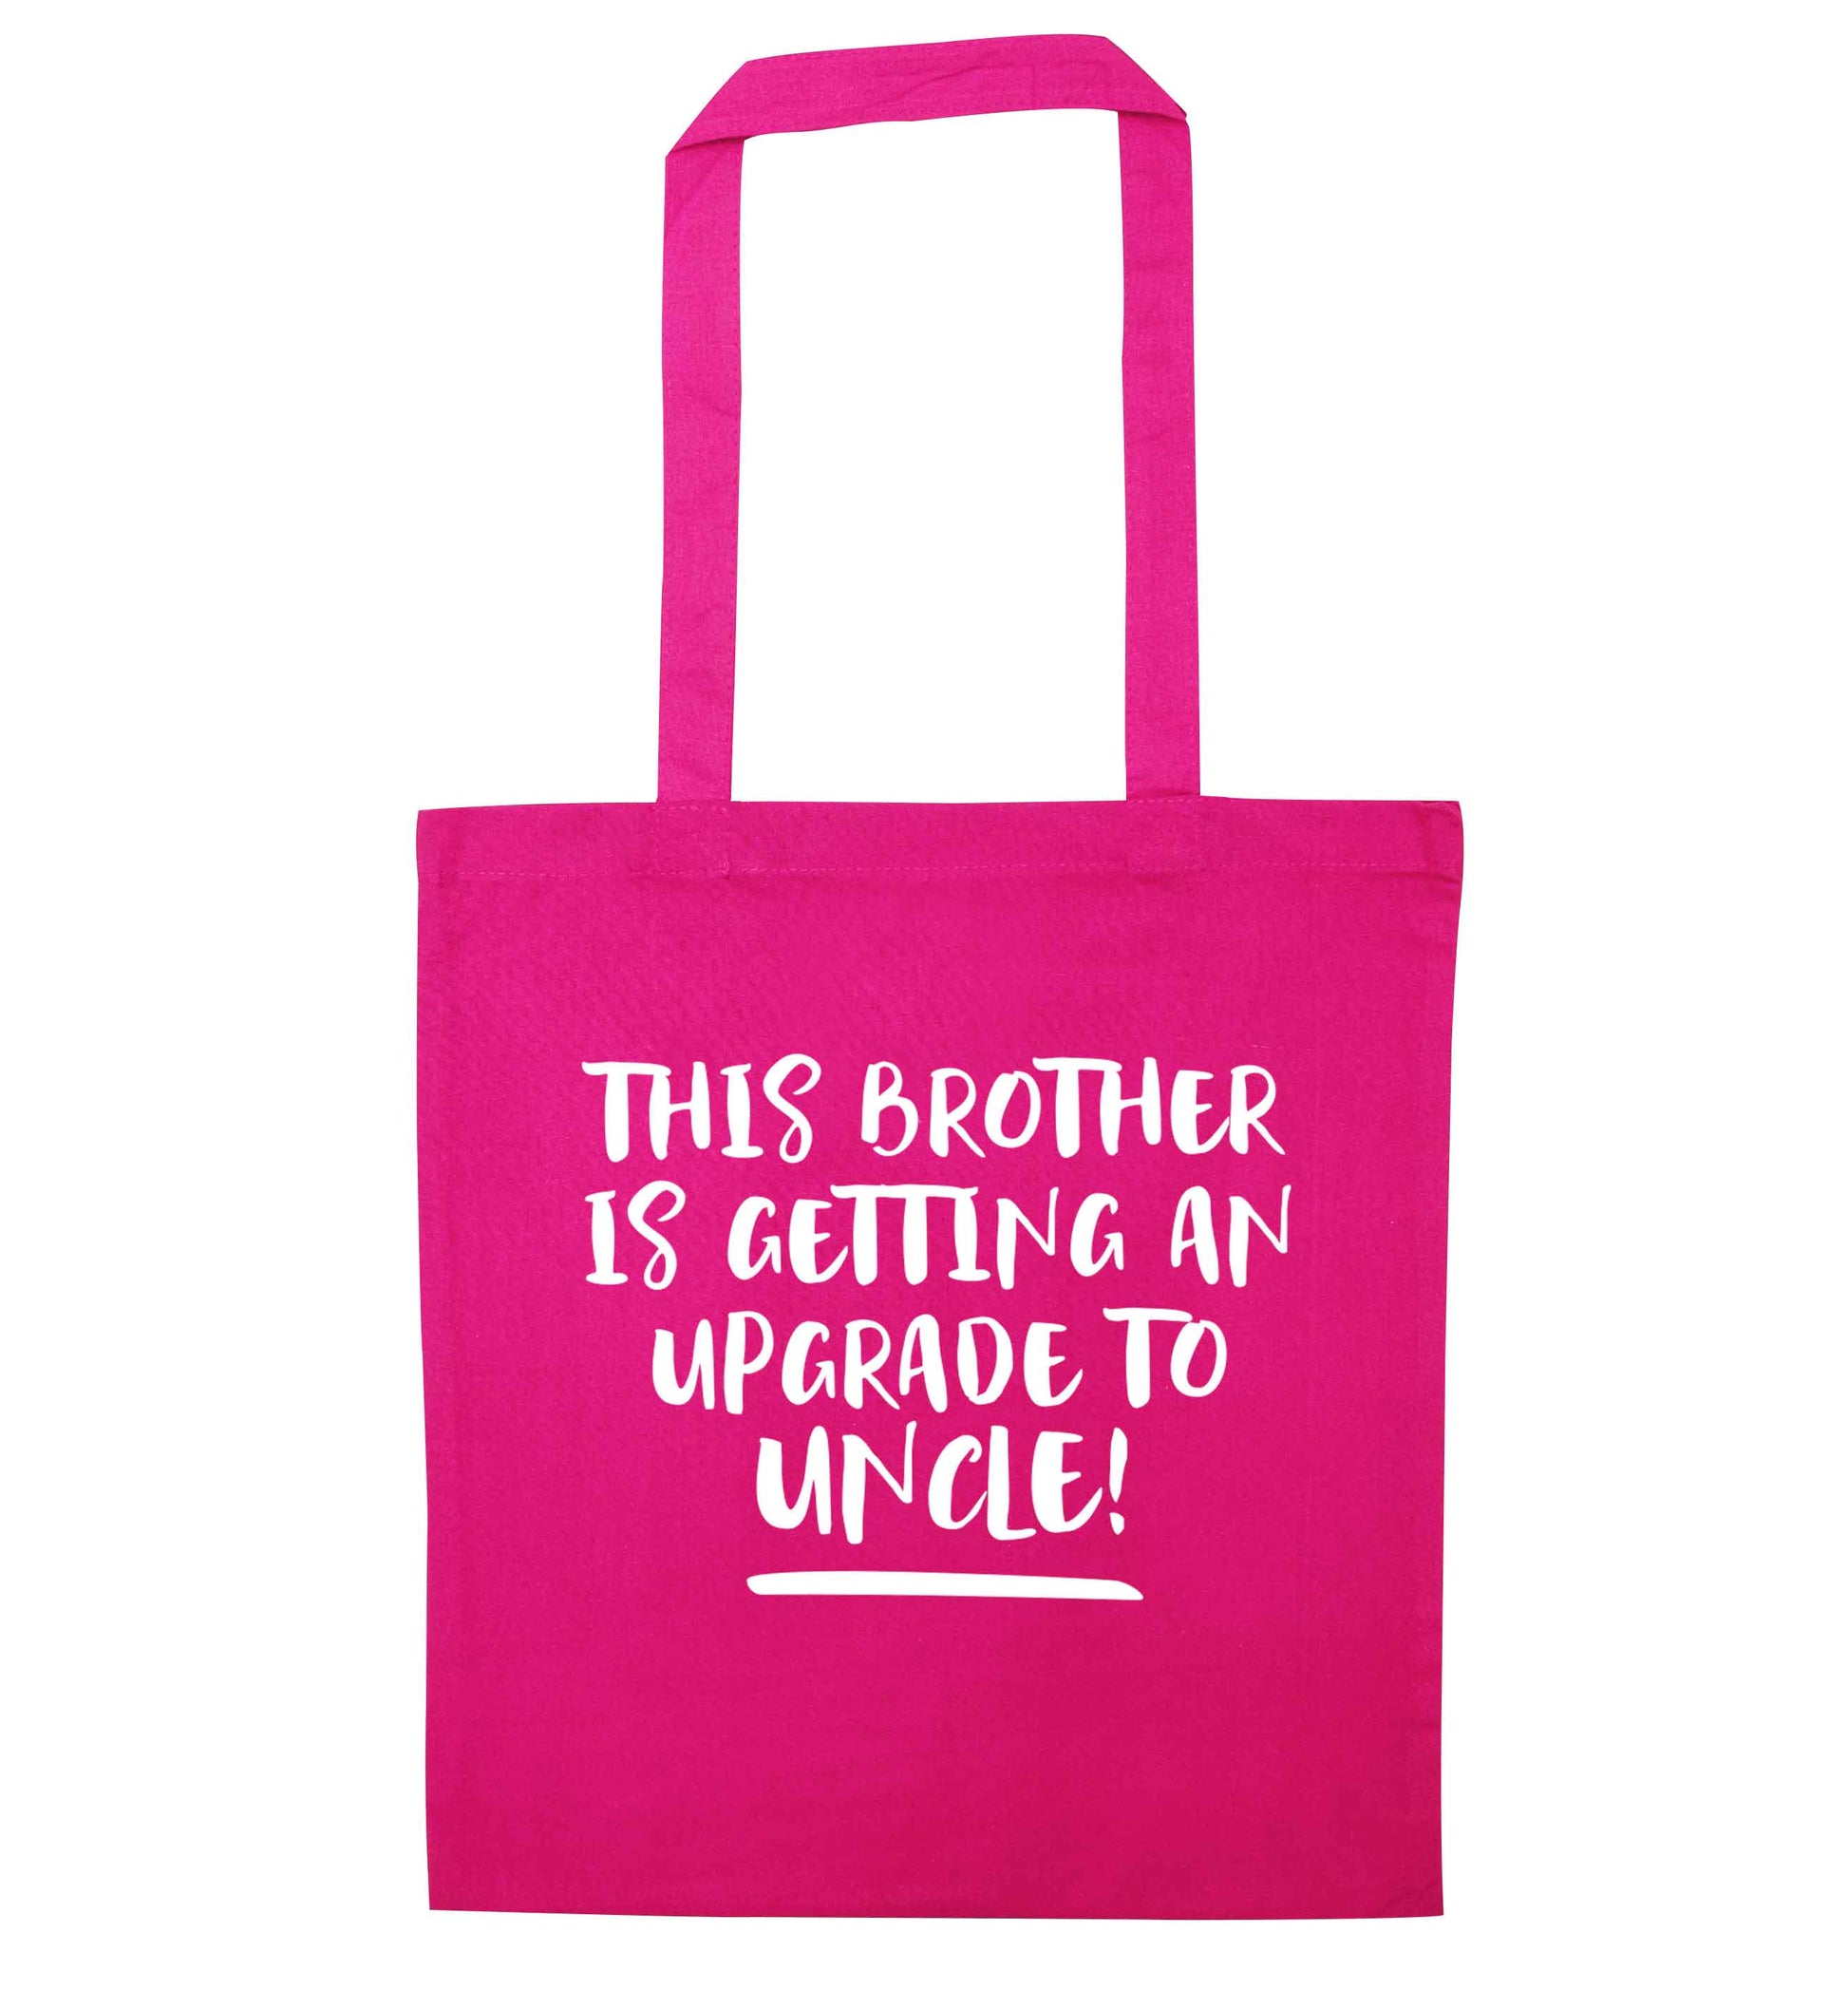 This brother is getting an upgrade to uncle! pink tote bag